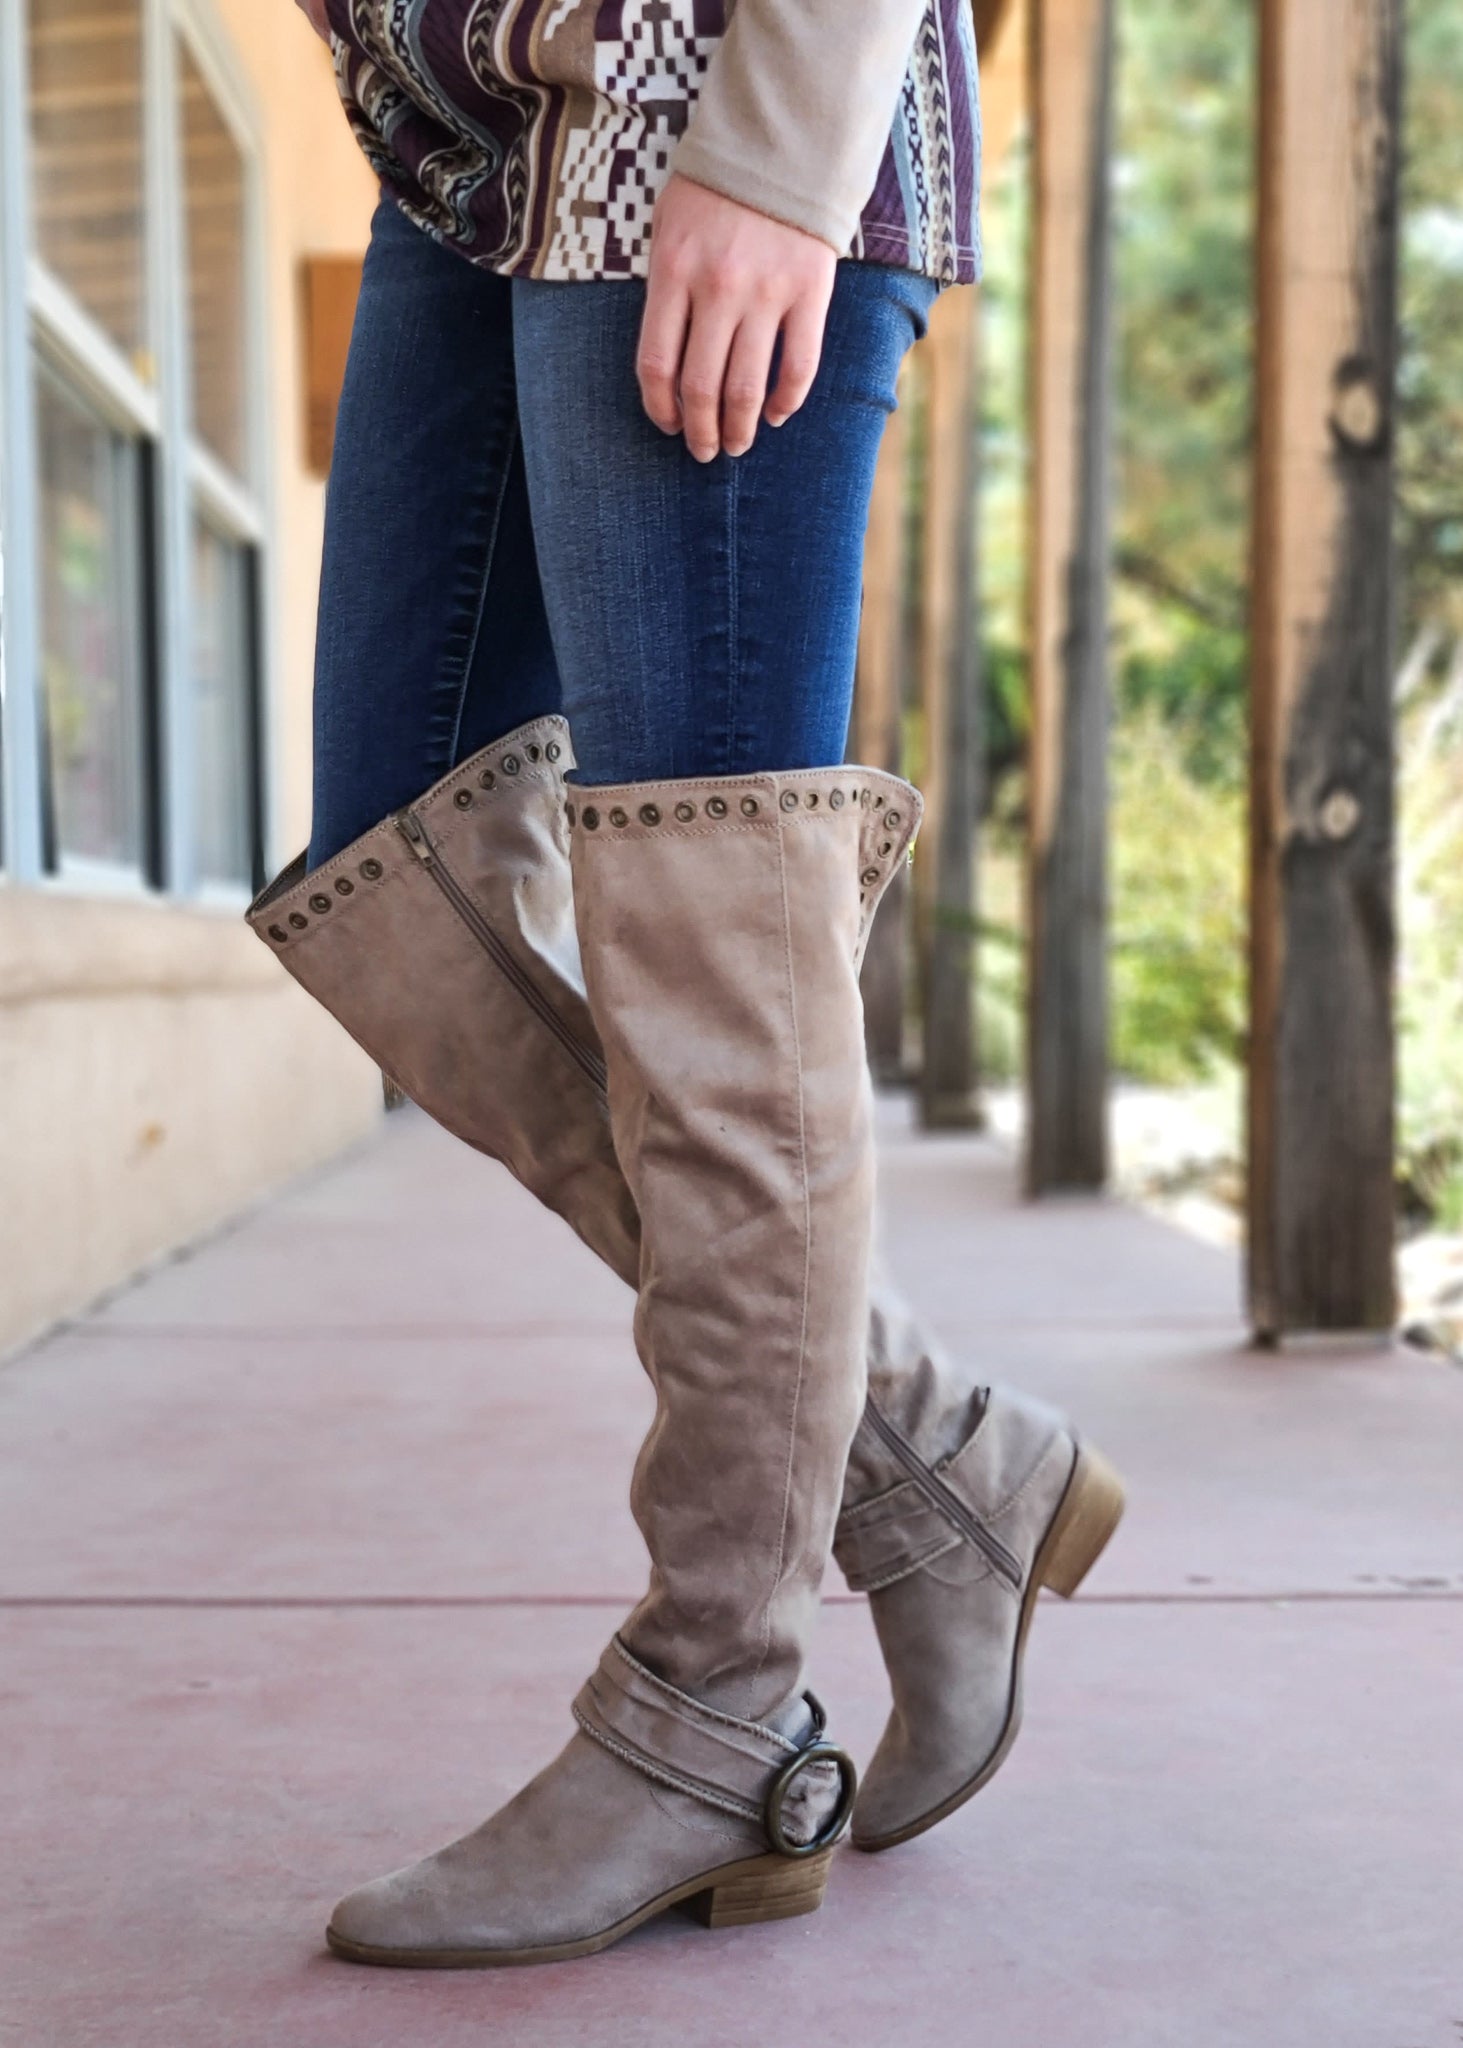 taupe boots knee high